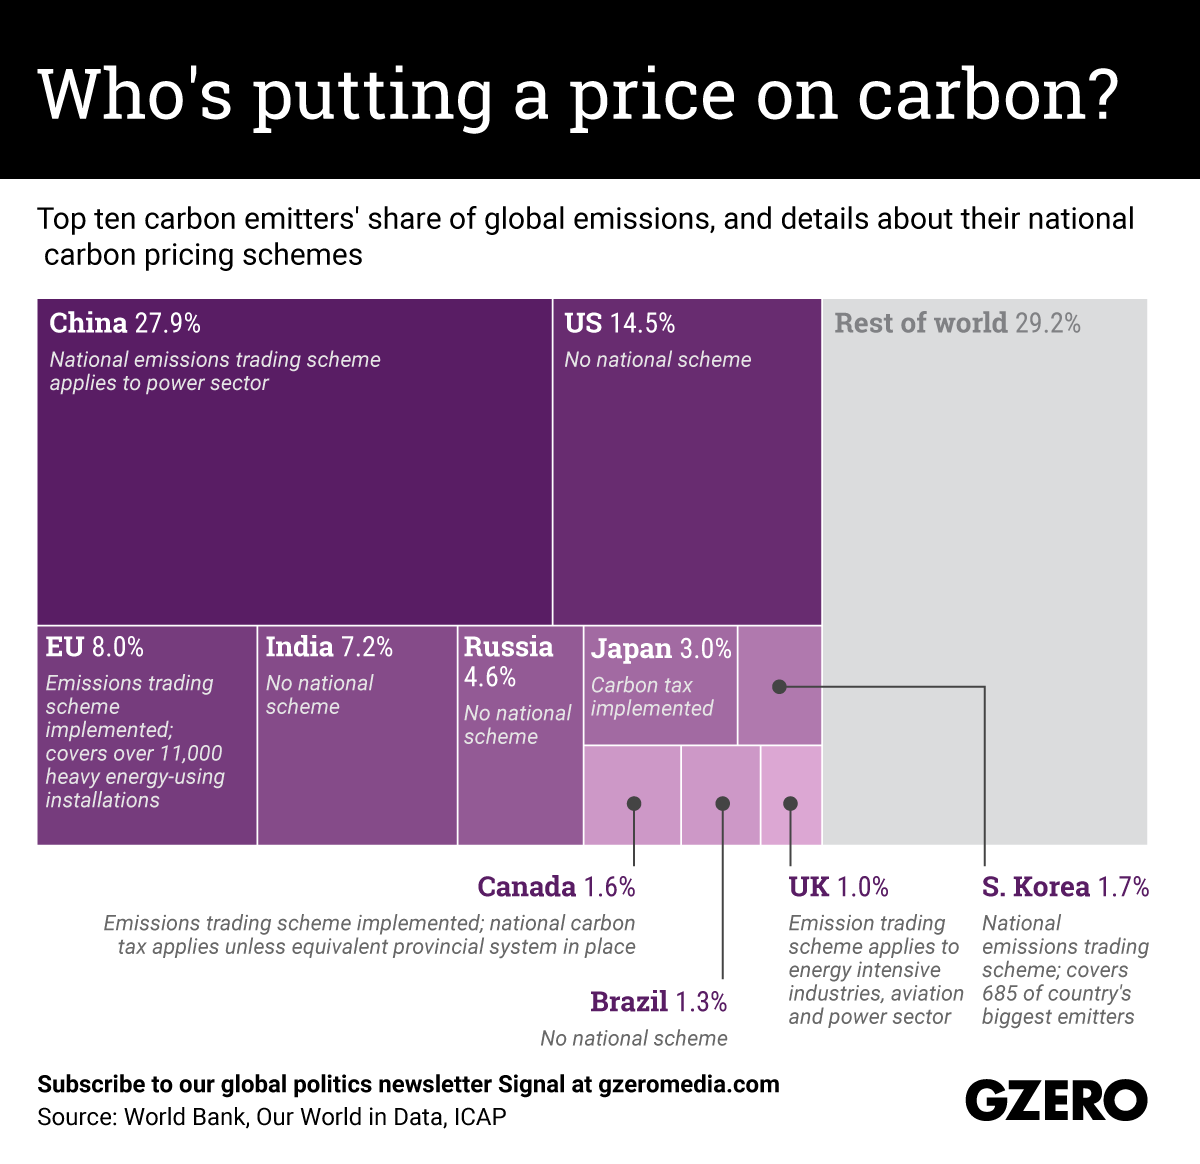 Top ten carbon emitters' share of global emissions, and details about their national carbon pricing schemes